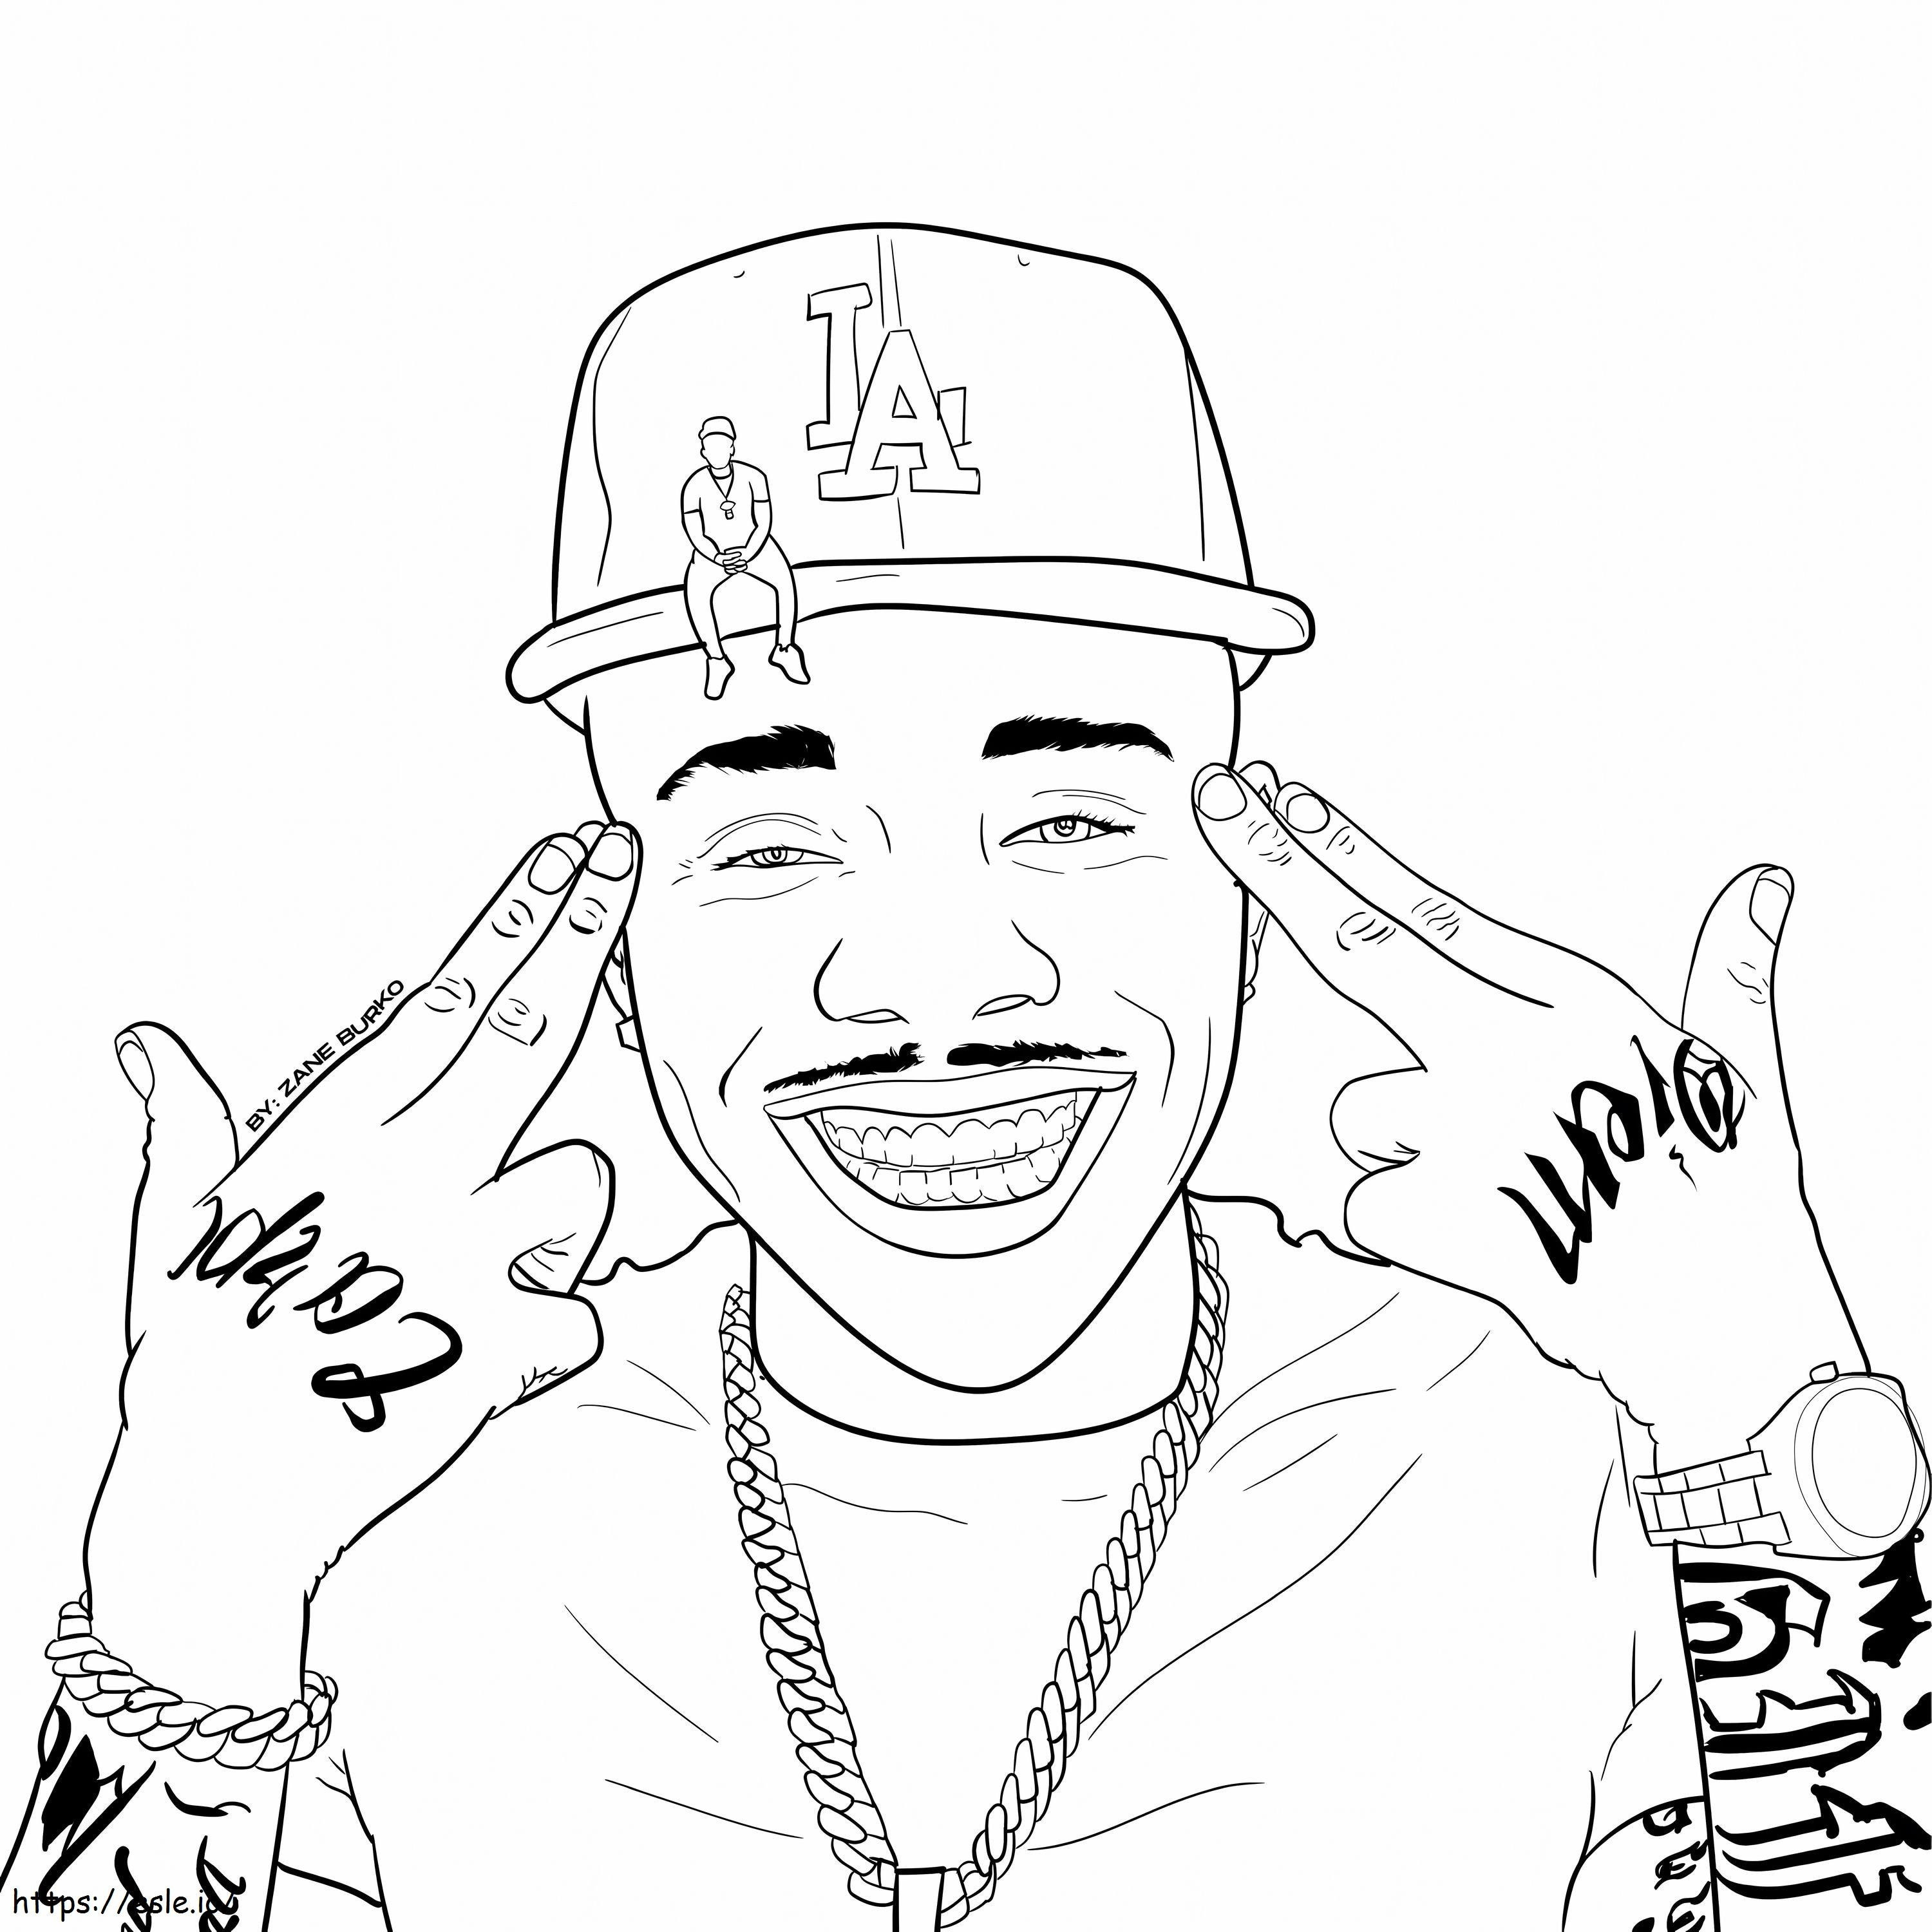 Rapper With Necklace coloring page